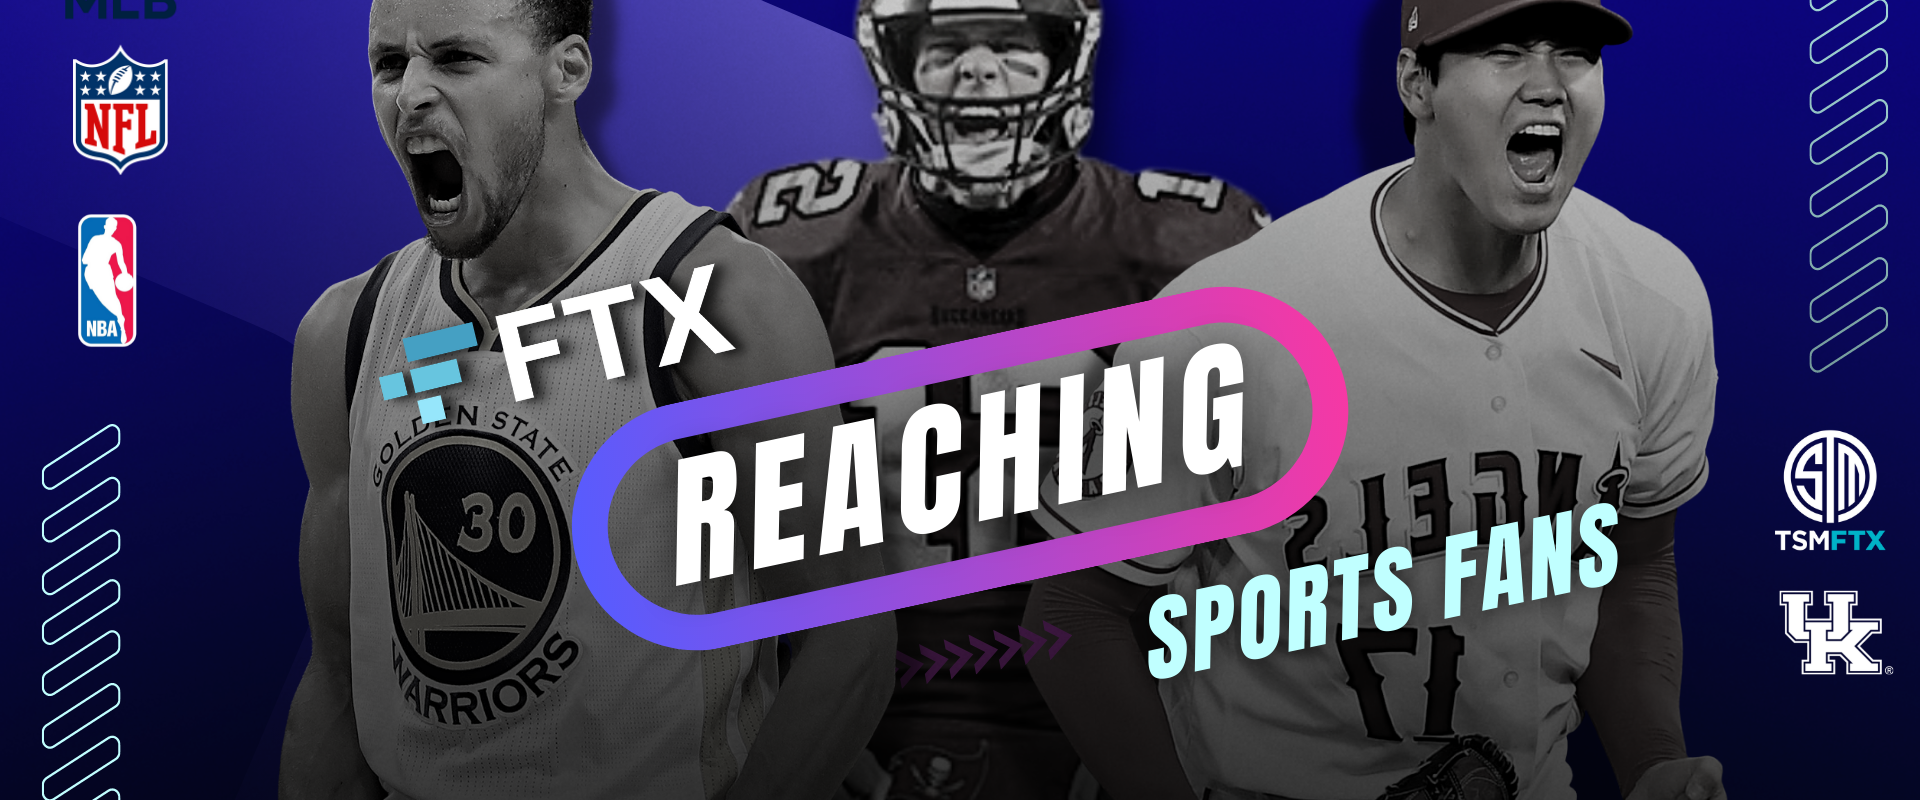 1920x1080_In 2021, FTX Used Sports To Reach Crypto-Curious Sports Fans-Ron